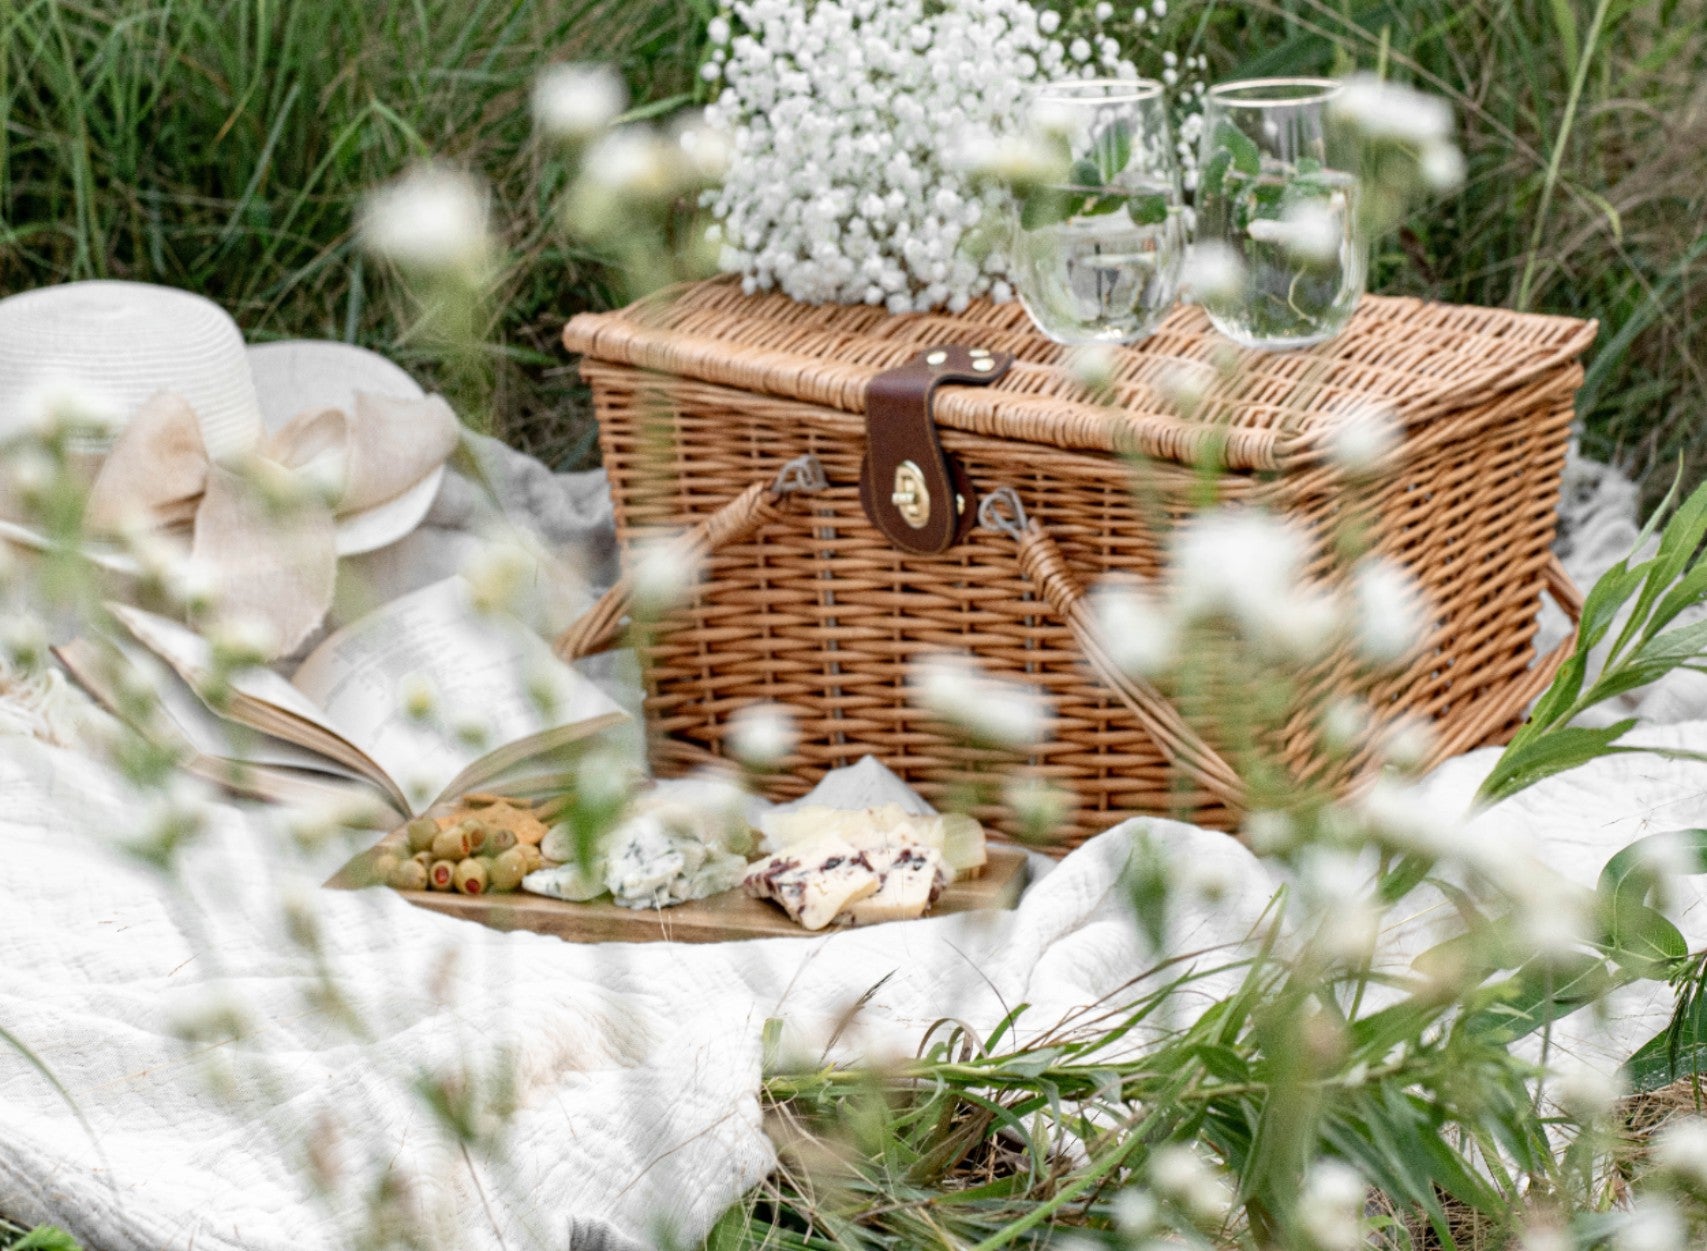 Planning the perfect sustainable picnic